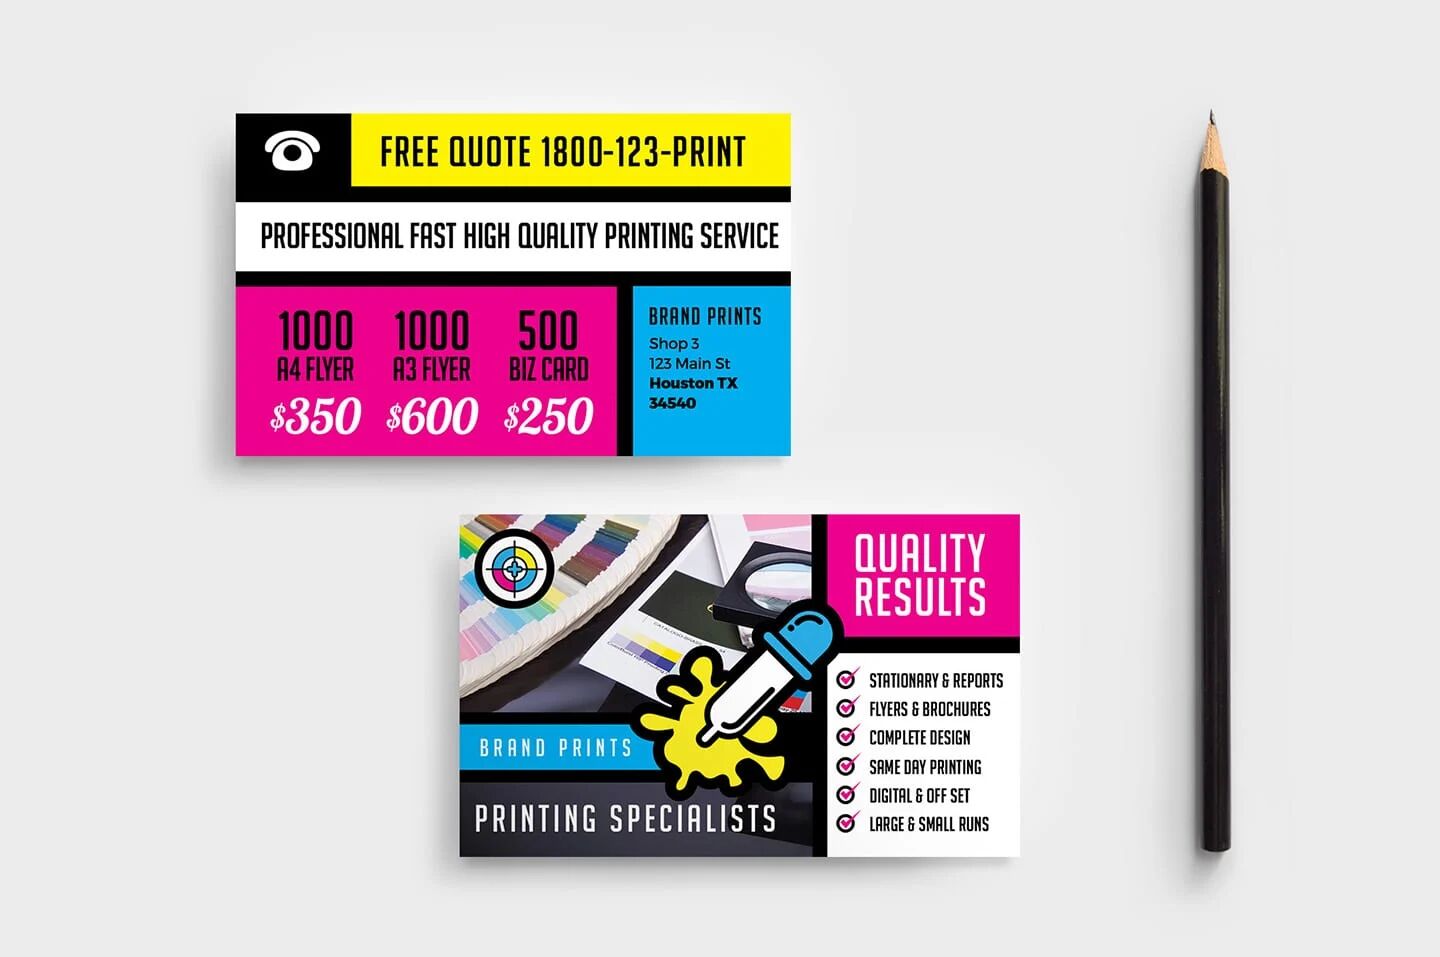 8 Colorful Print Shop Templates Pack FREE PSD